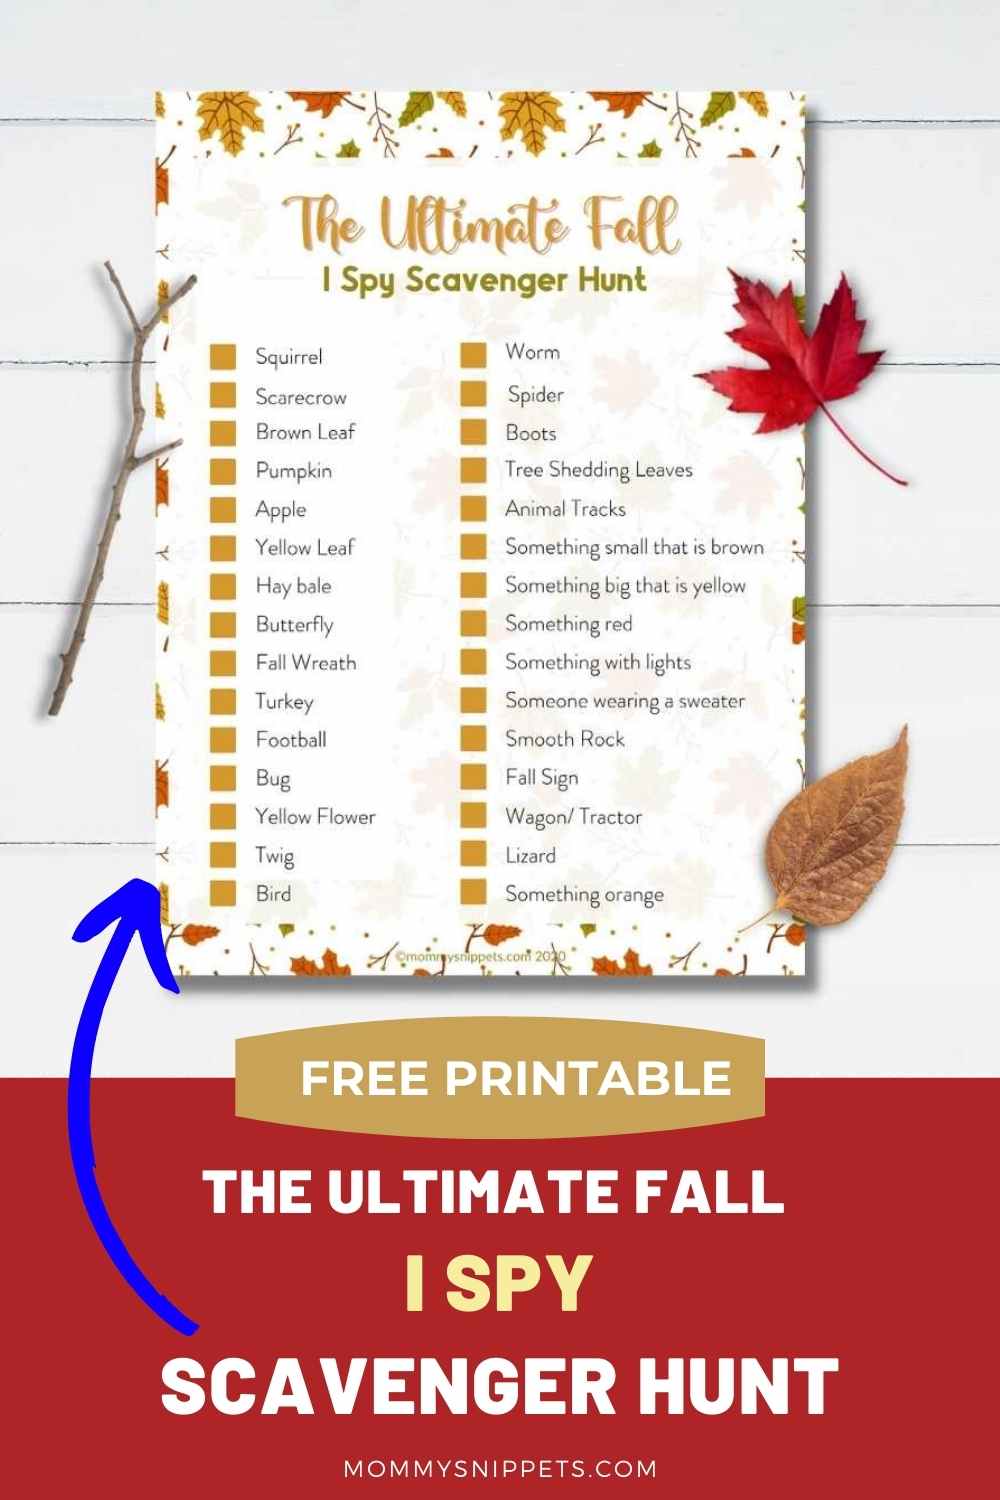 Download and print this FREE Printable Fall Scavenger Hunt